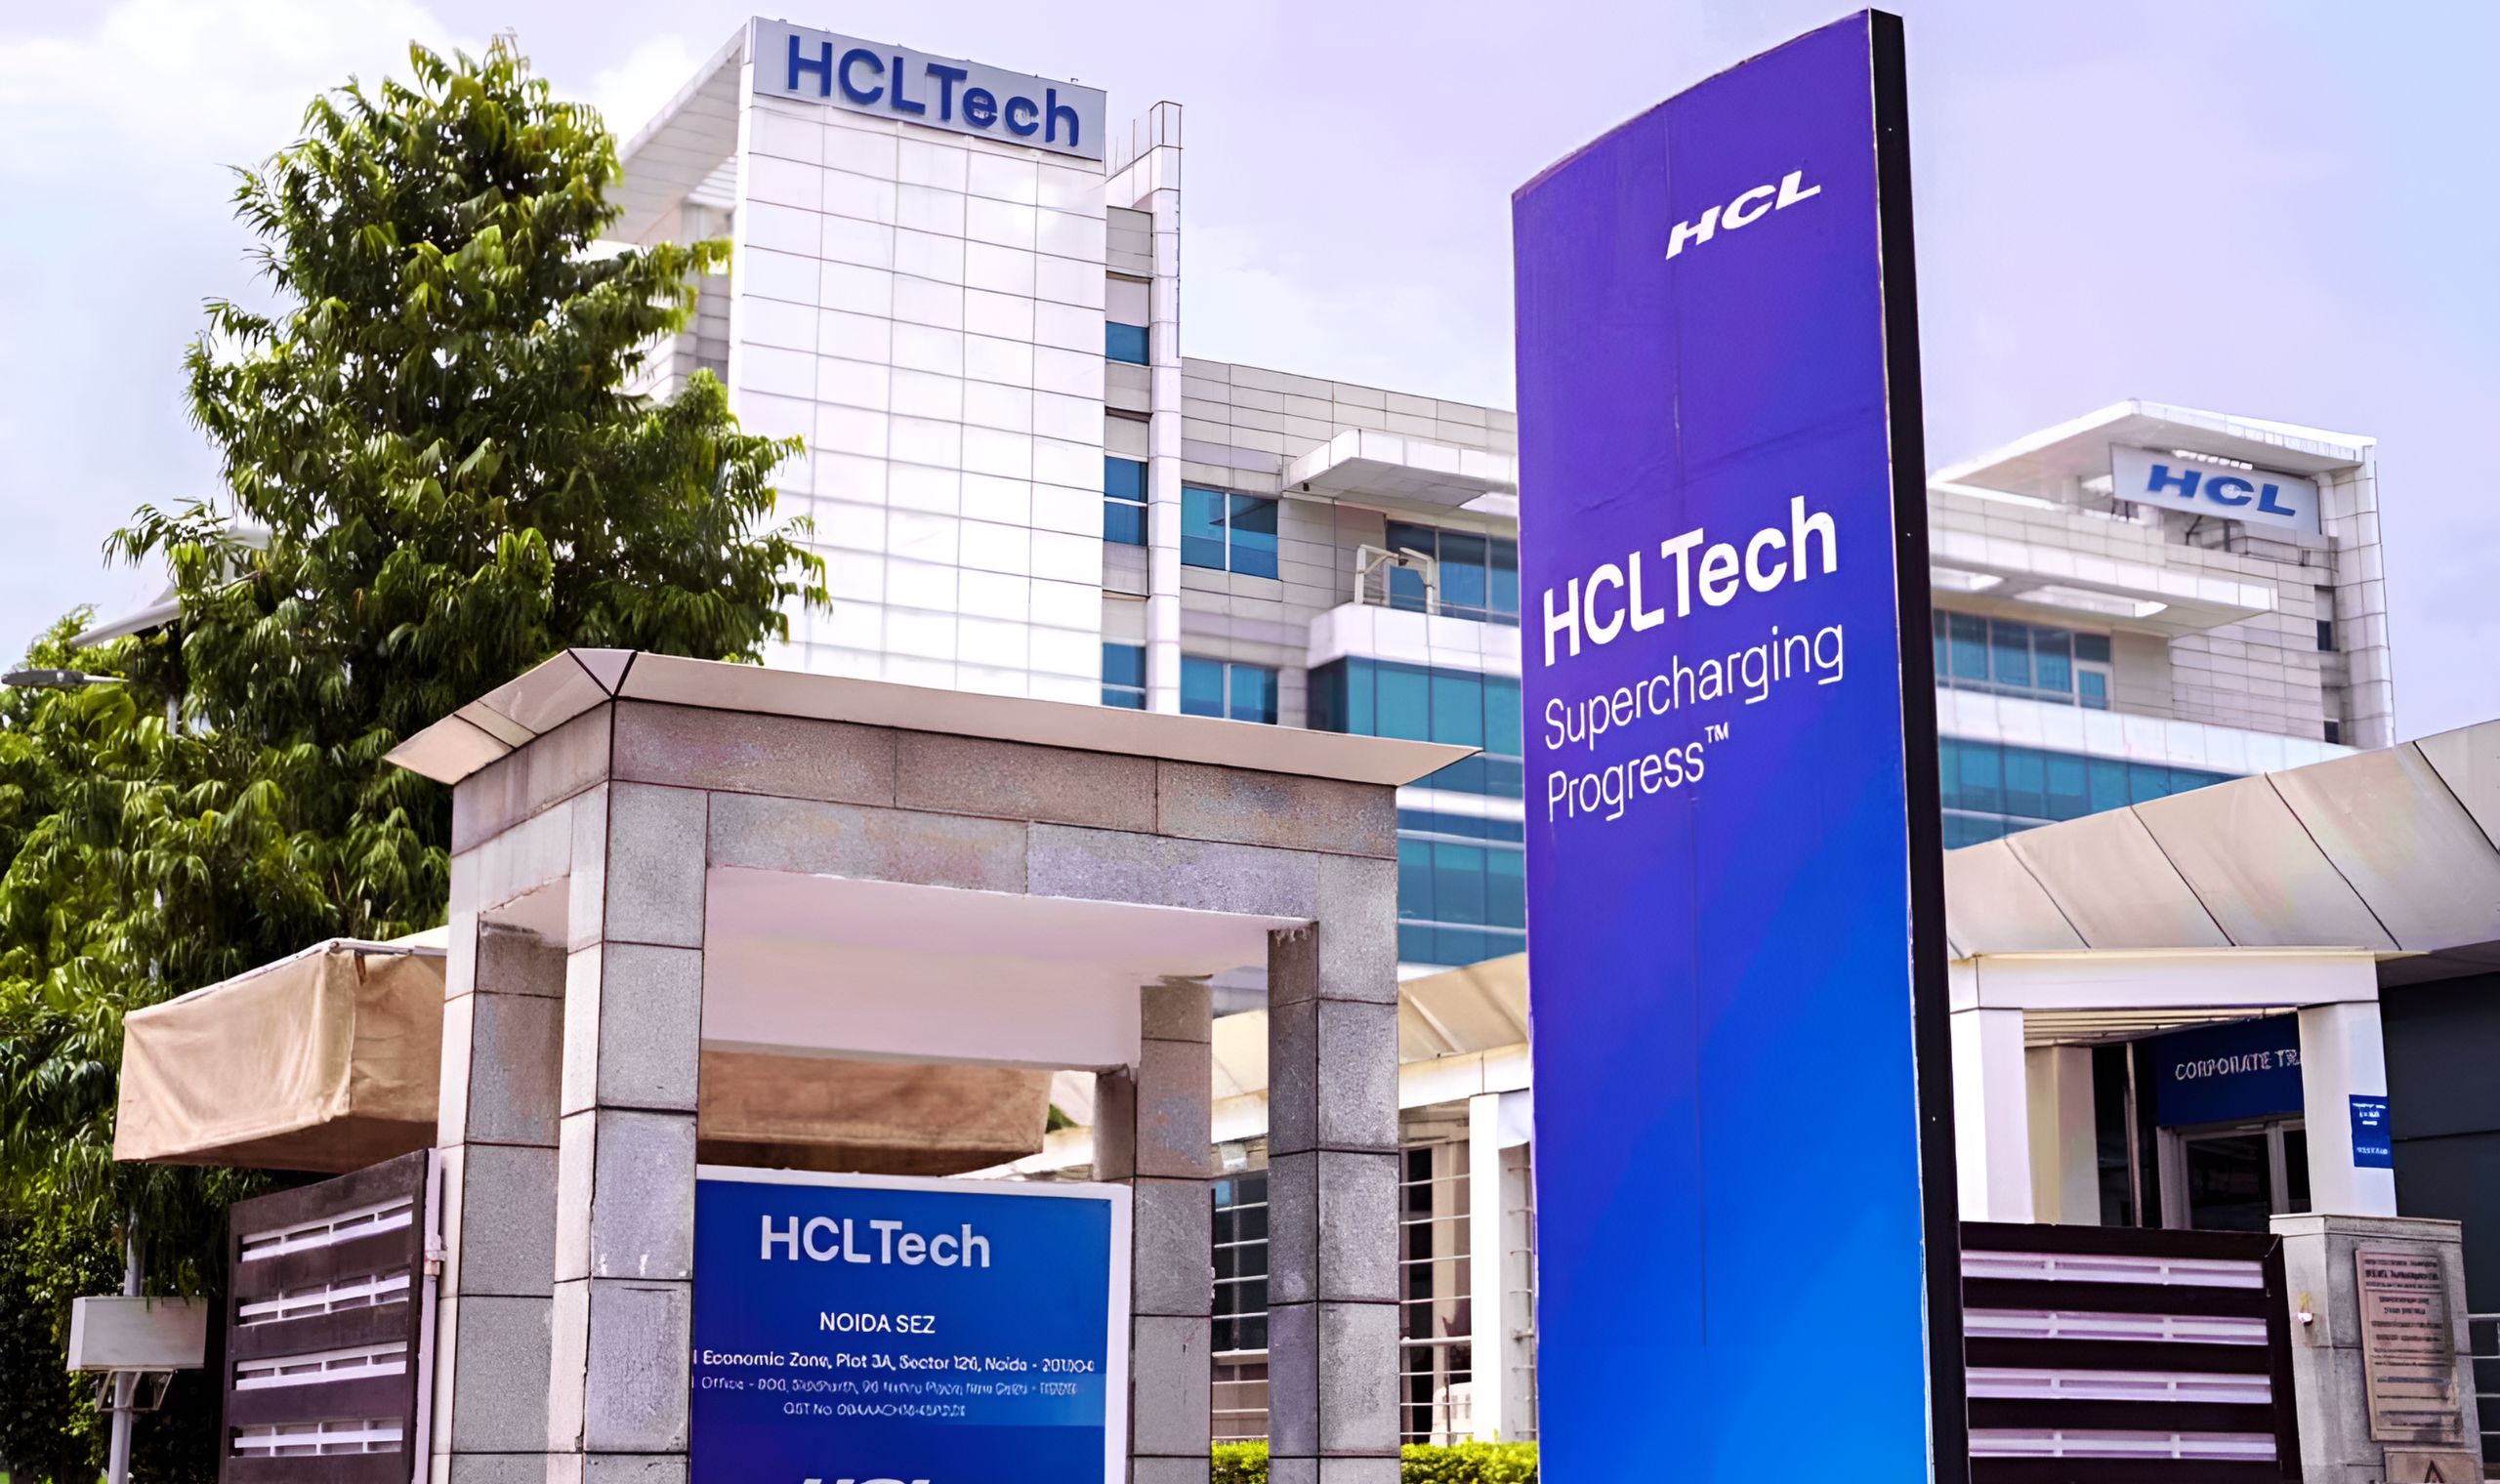 HCLTech Shares Get a 3% Boost from its 8 Million Renewal Agreement with Germany’s apoBank